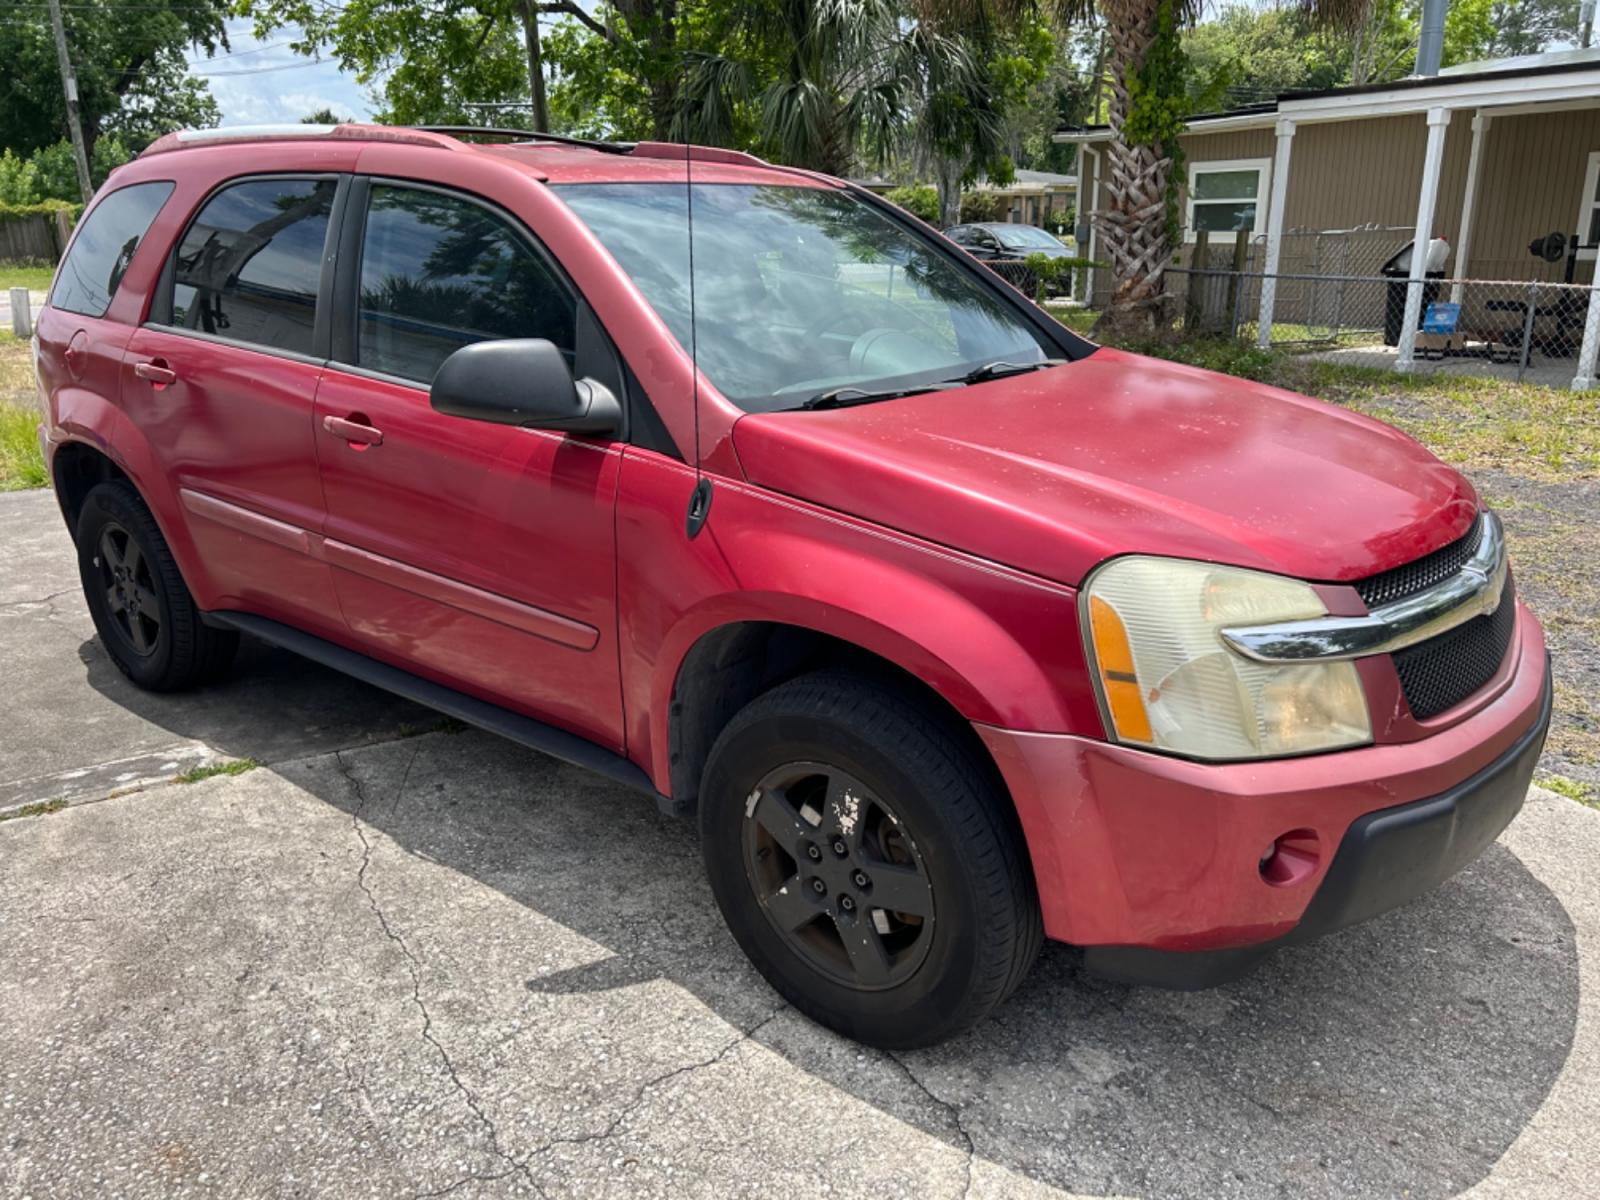 2005 Chevrolet Equinox (2CNDL63F156) , located at 1758 Cassat Ave., Jacksonville, FL, 32210, (904) 384-2799, 30.286720, -81.730652 - LOW MILEAGE!!!!! ONLY 86,523 MILES!!!!! 2005 CHEVROLET EQUINOX LT MODEL LEATHER 4-DOOR AUTOMATIC TRANSMSSION ICE COLD AIR CONDITIONING RUNS GREAT $3900.00 DON'T HESITATE OR THIS ONE WILL BE GONE CALL US @ 904-384-2799 - Photo #2